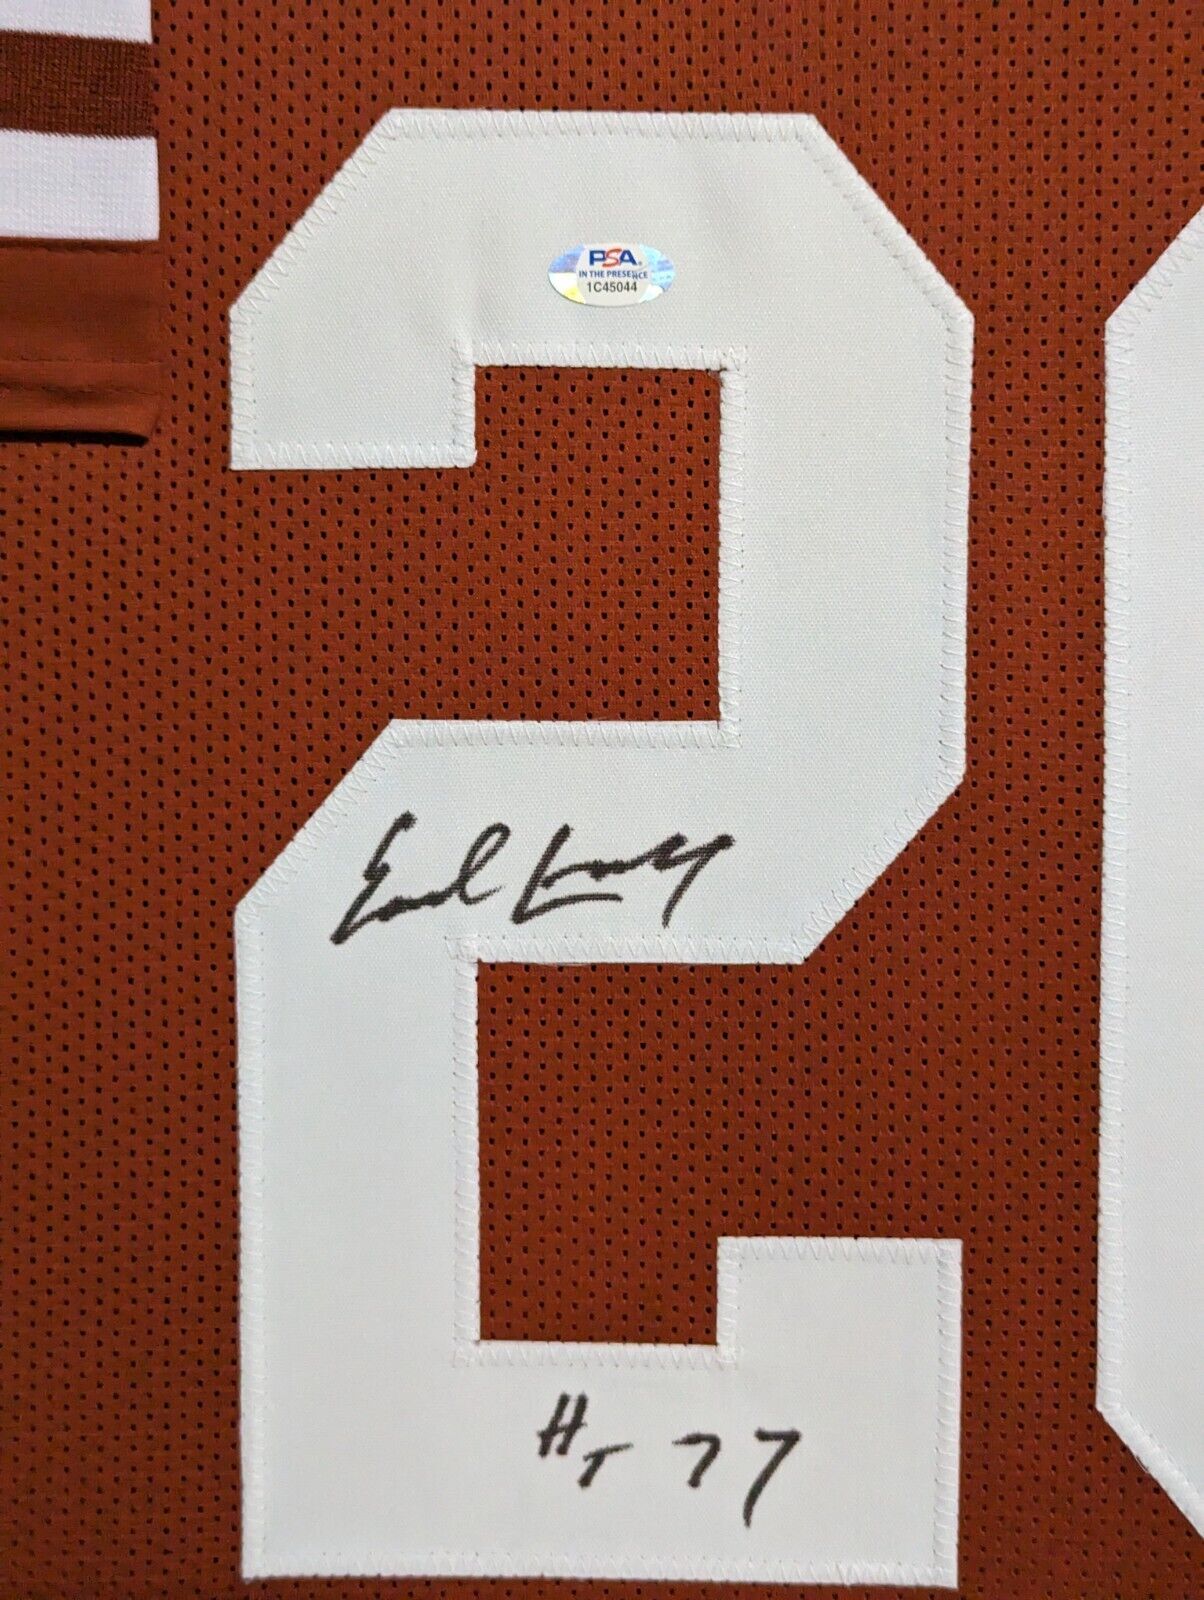 MVP Authentics Framed Texas Longhorns Earl Campbell Autograph Inscribed Signed Jersey Psa Coa 495 sports jersey framing , jersey framing